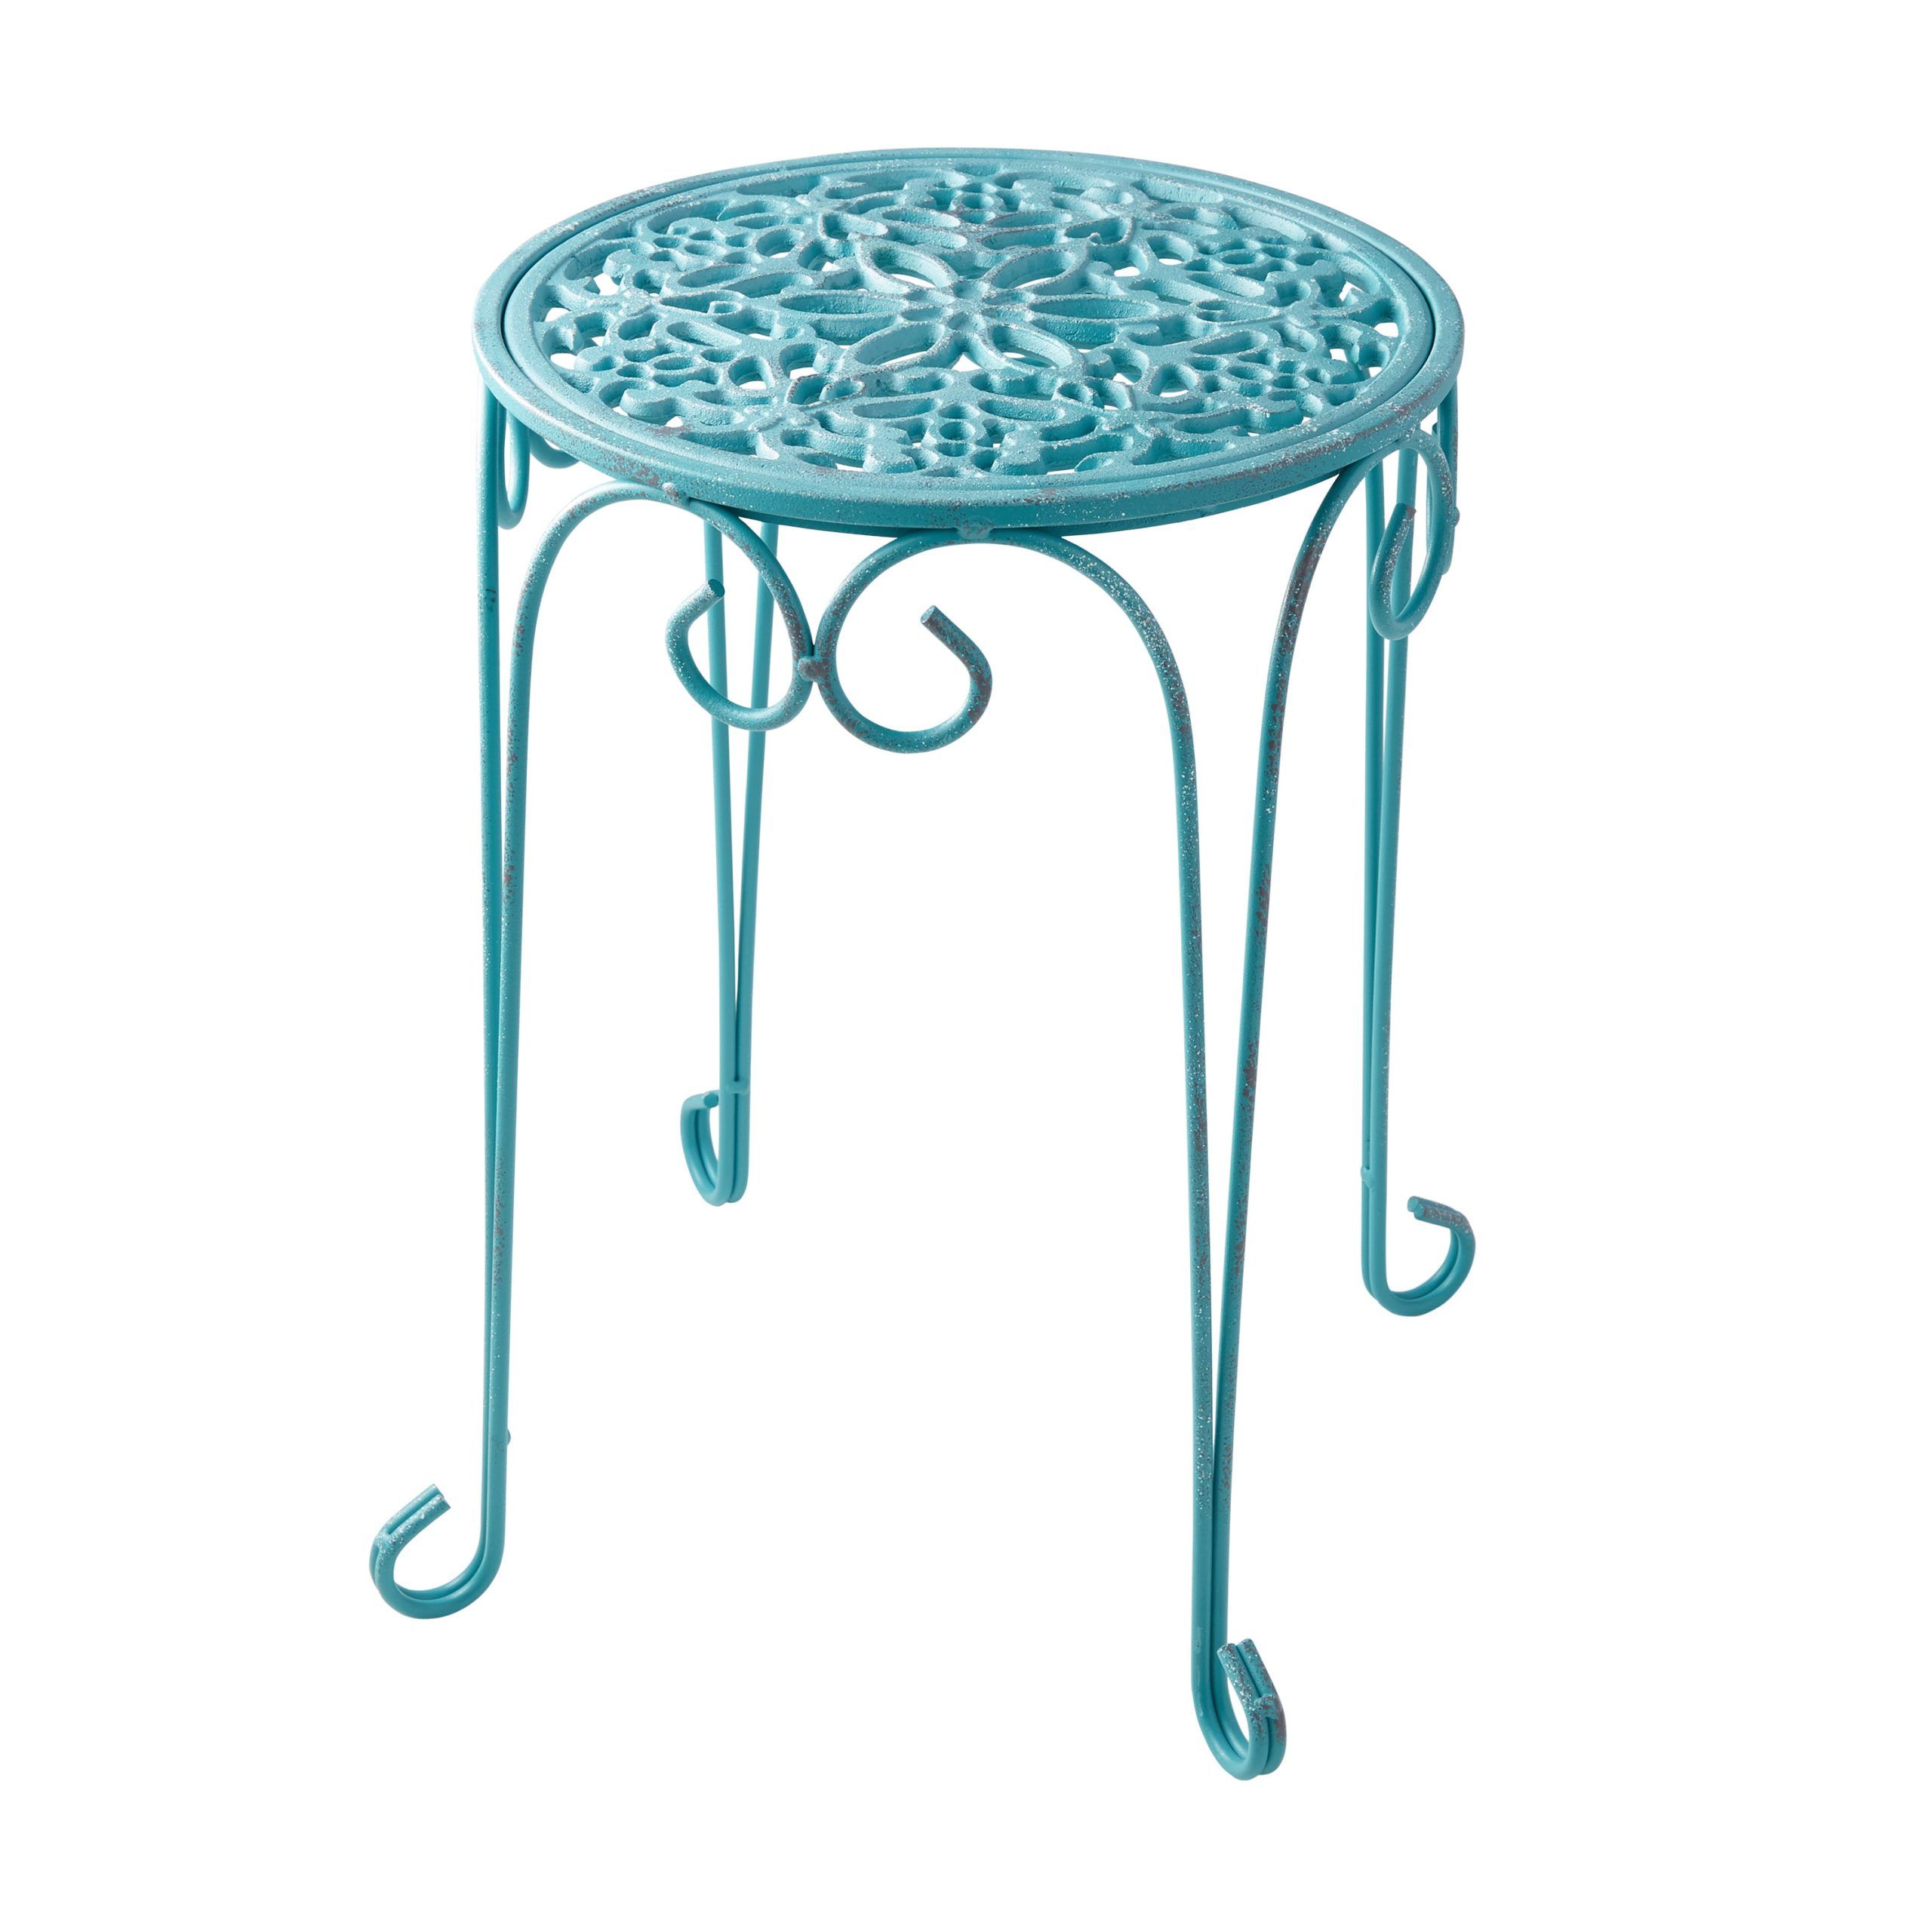 The Pioneer Woman 16" Cast Iron Plant Stand Teal Color With Distressed  Finish – Walmart For 16 Inch Plant Stands (View 5 of 15)